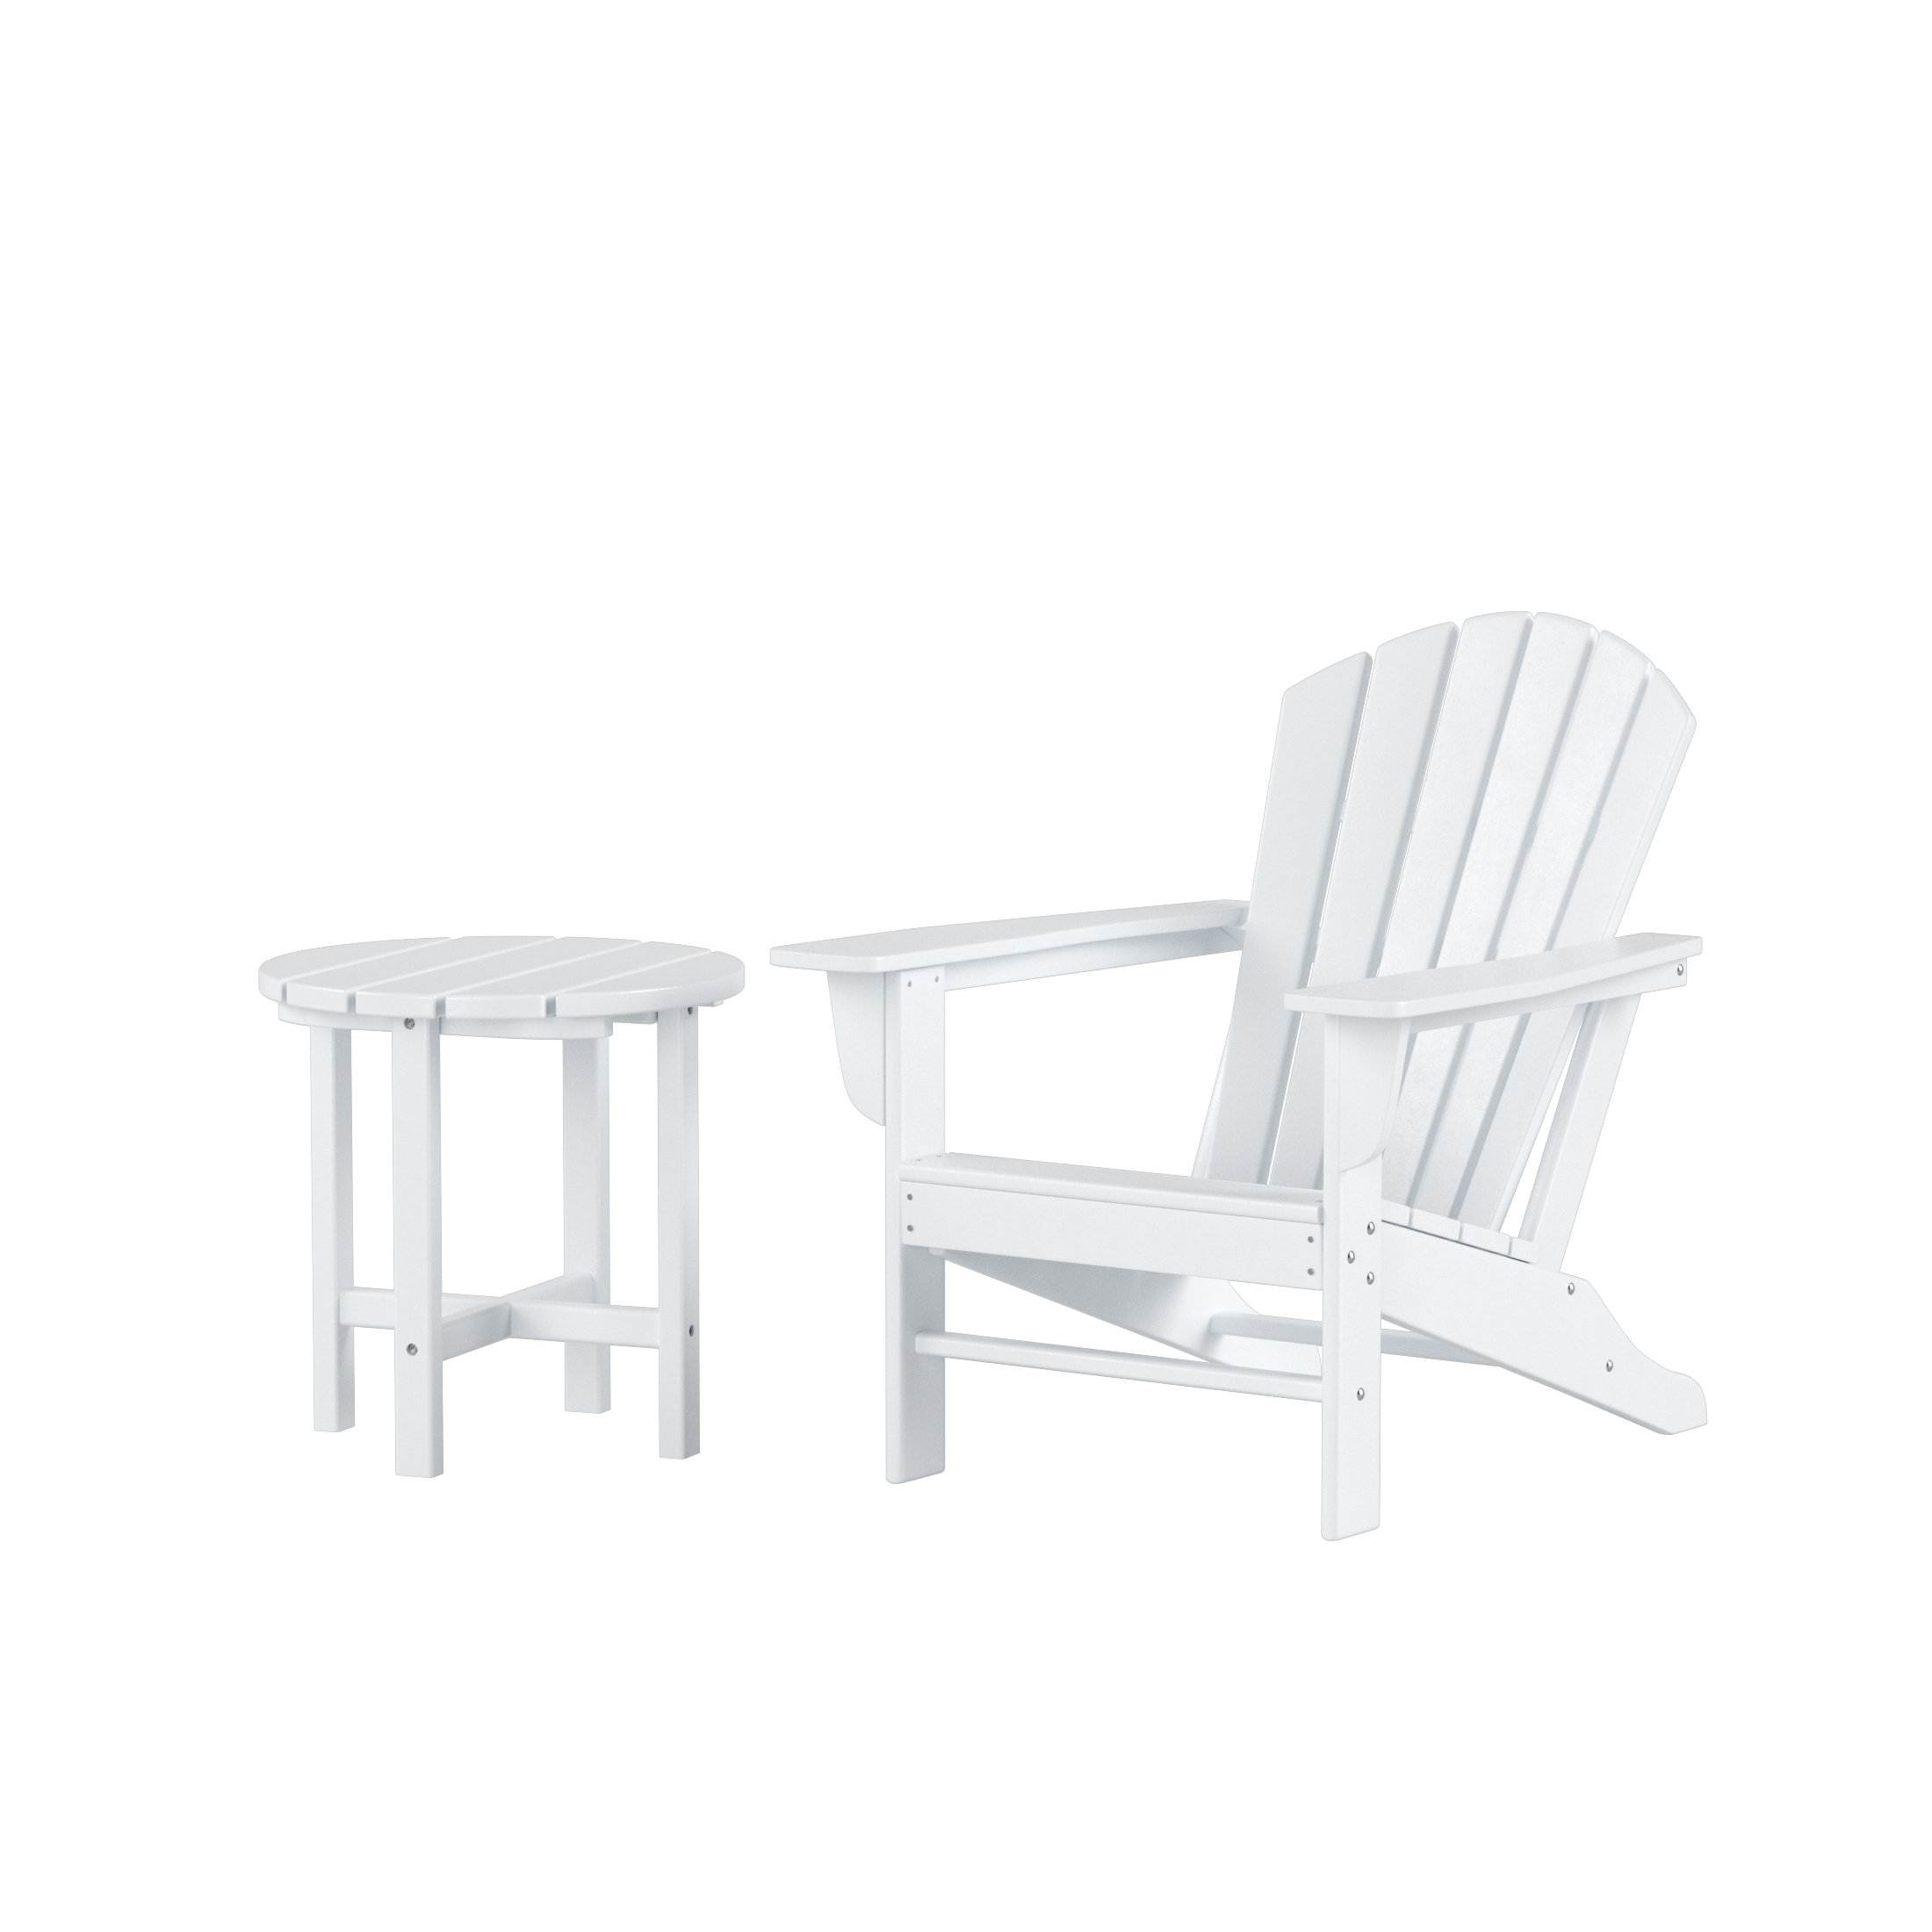 Westin Outdoor with Side Table HDPE Plastic Adirondack Chair - White (Set of 2) - image 2 of 5